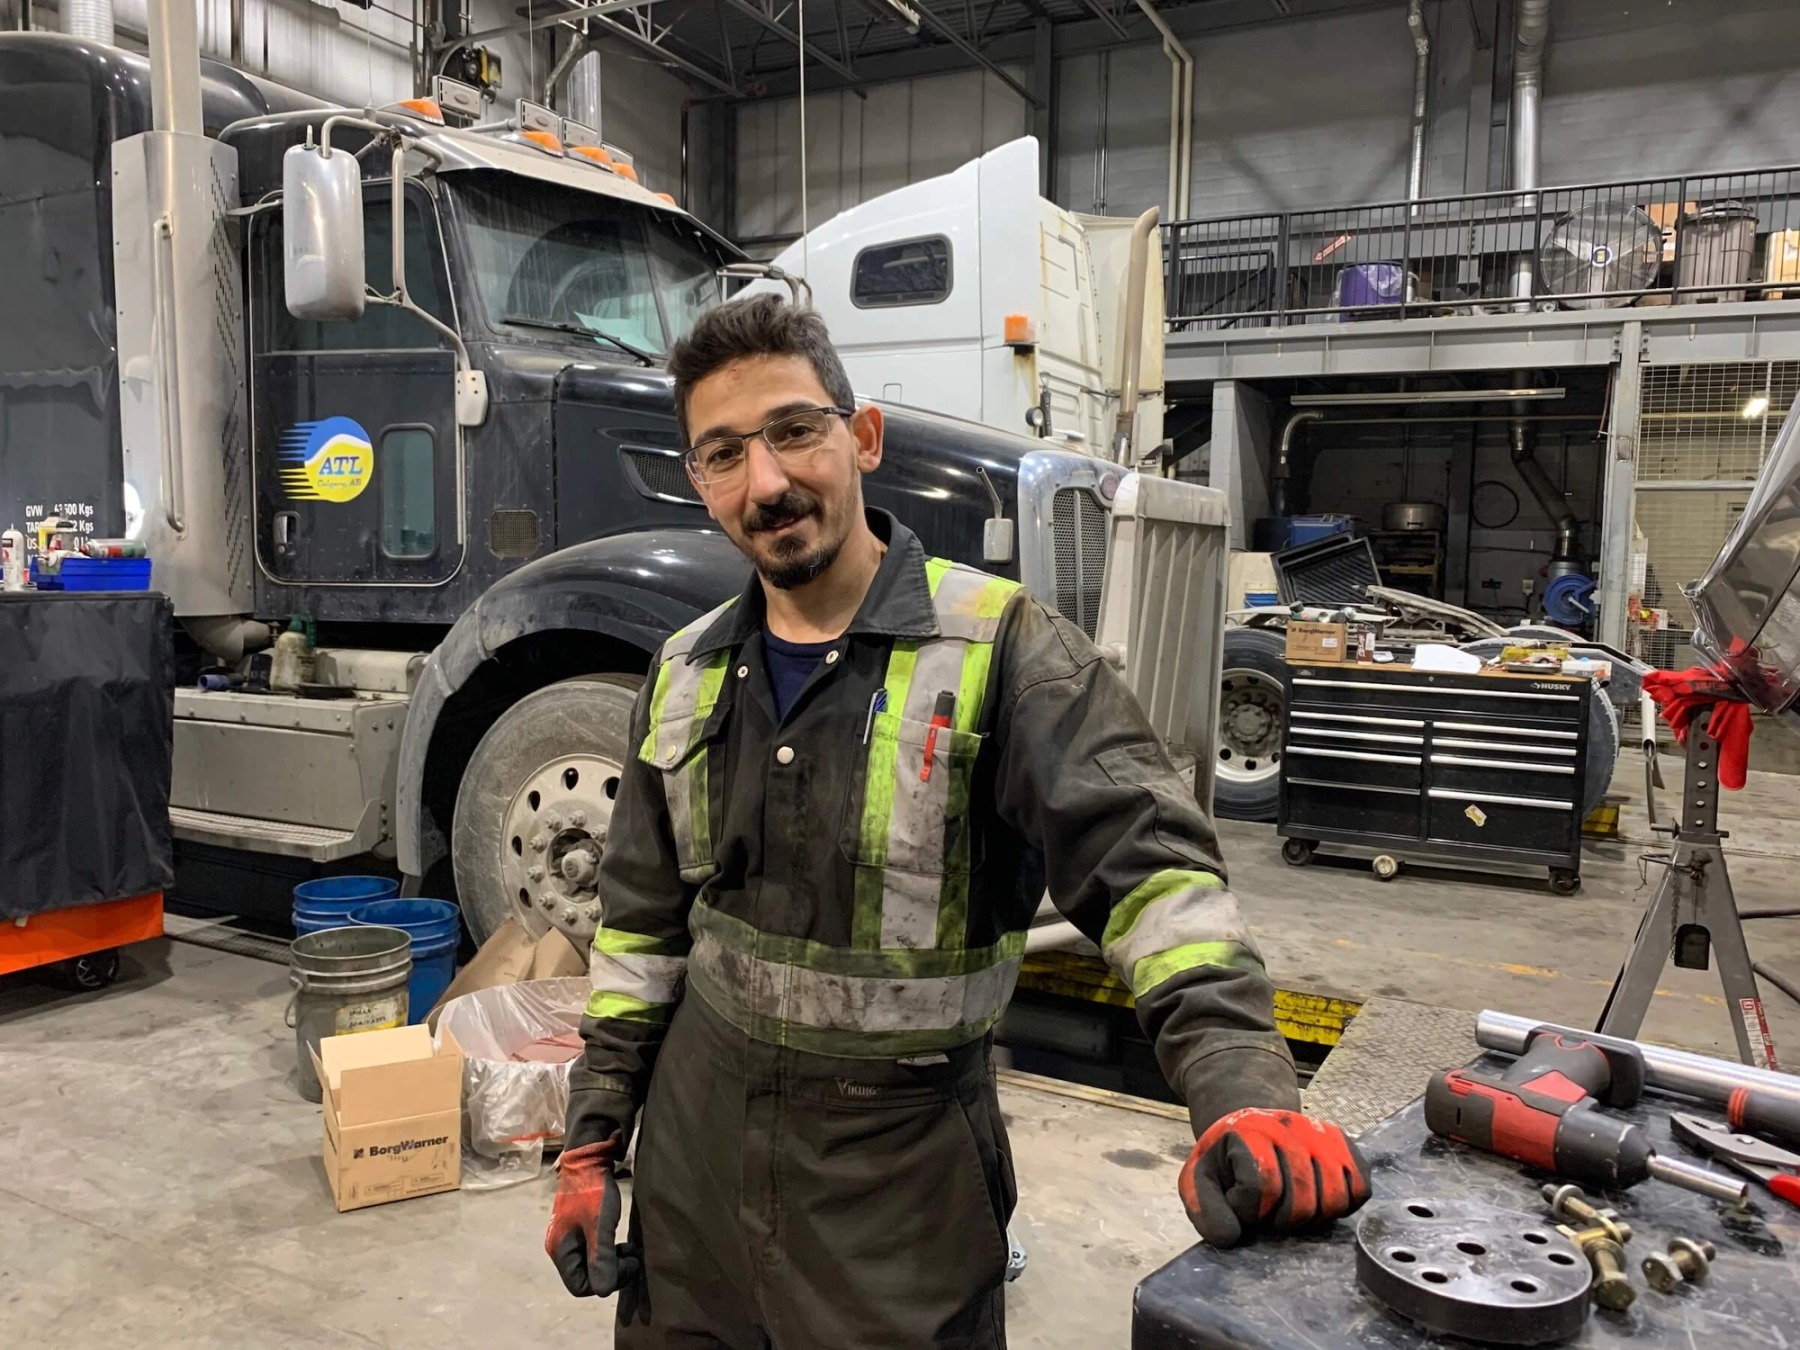 A young person in black coveralls and safety gear poses for a photo in an auto shop, in front of a large black semi truck.